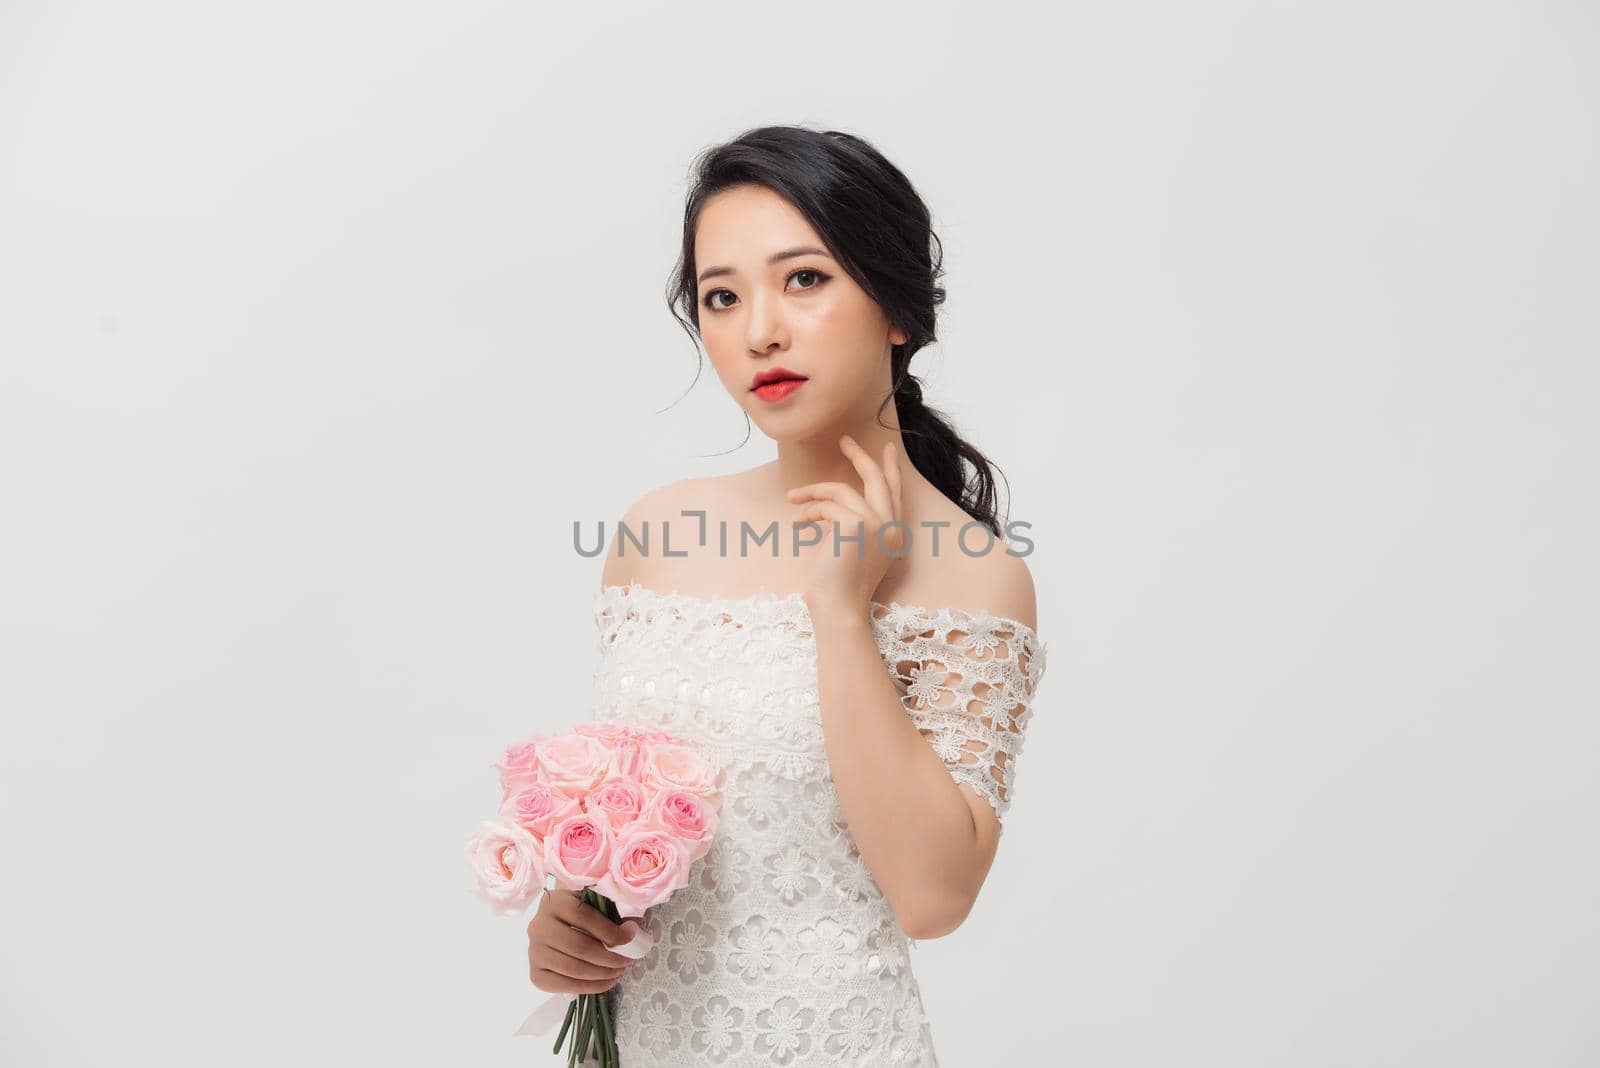 Fashion portrait of elegant woman with rose flower bouquet over white background. by makidotvn